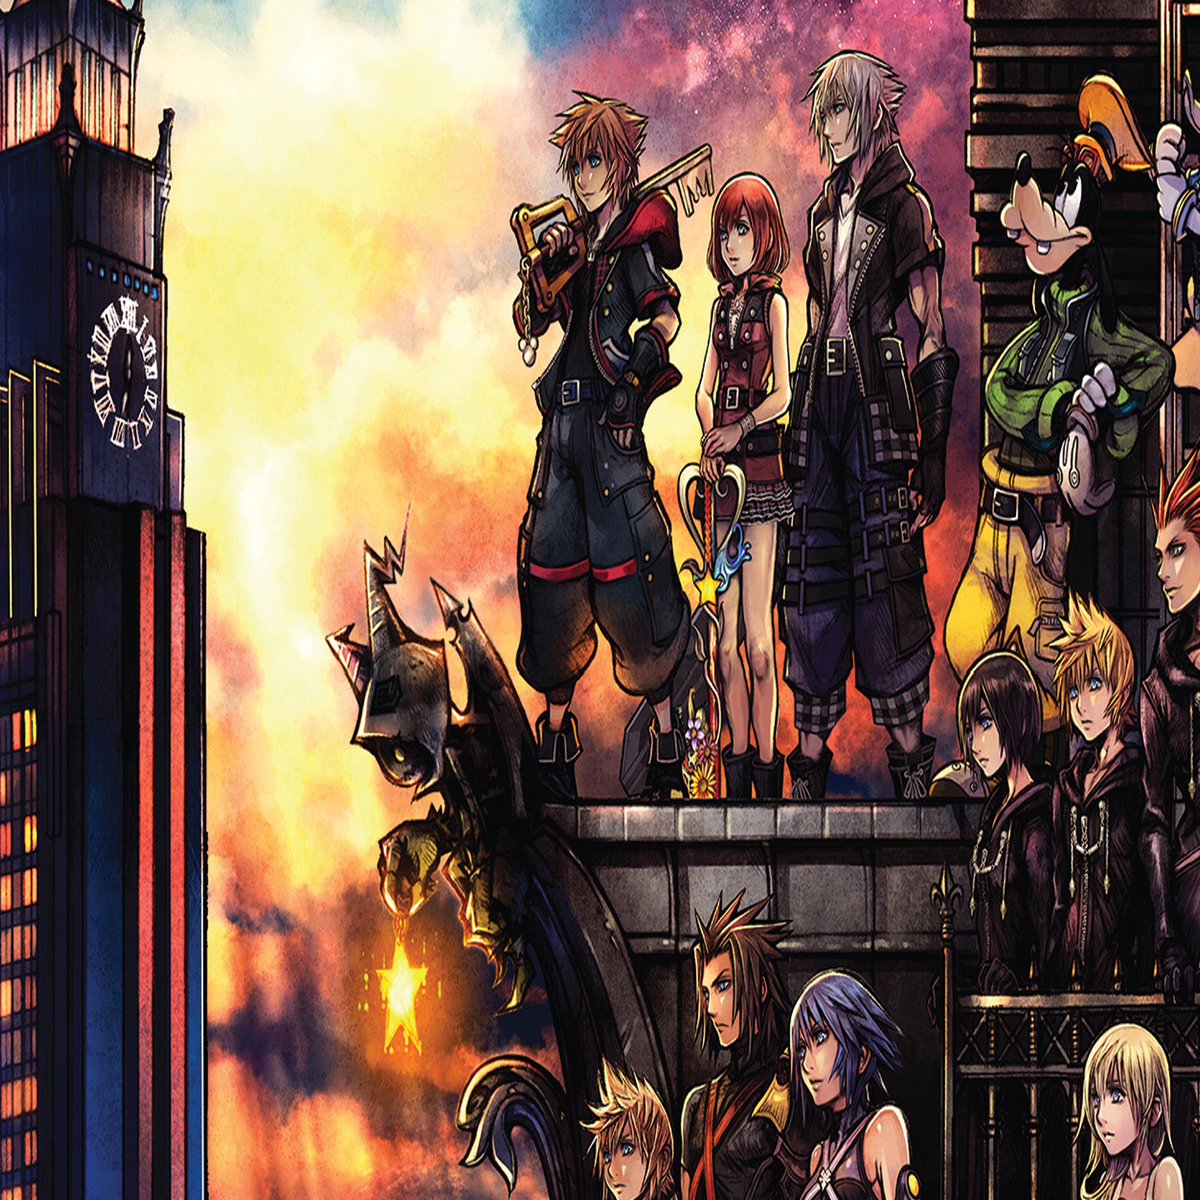 Kingdom Hearts 3 review - a grand finale that's both torturous and sublime